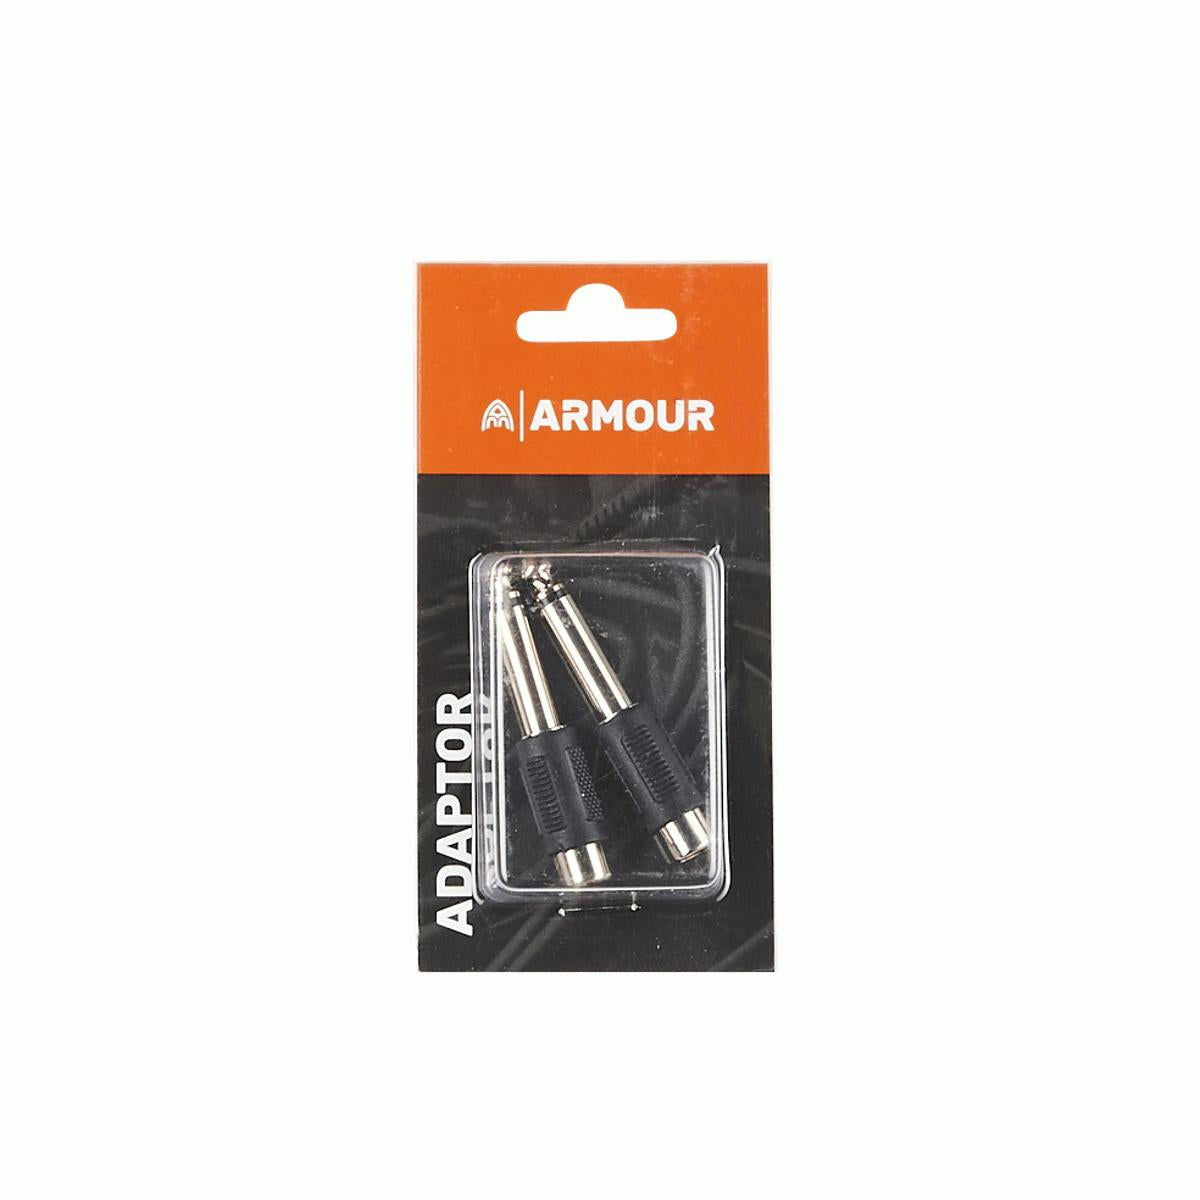 Armour ADAP3 RCA Female to 6.5mm Male Mono Adaptor - 2 Pieces